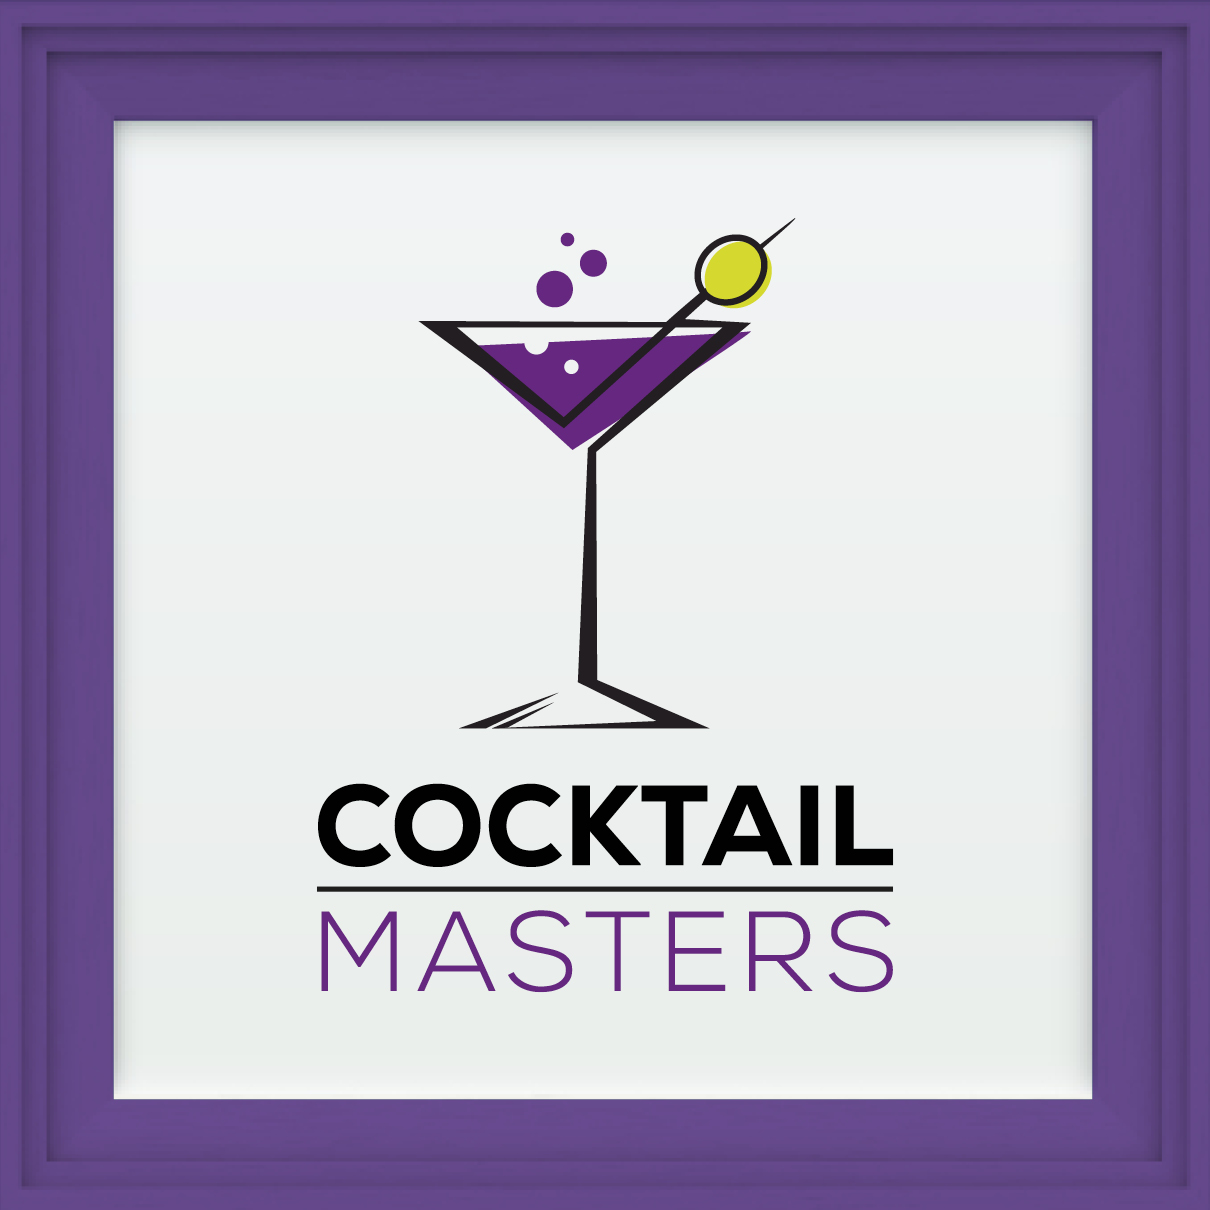 Cocktail-Masters-logo